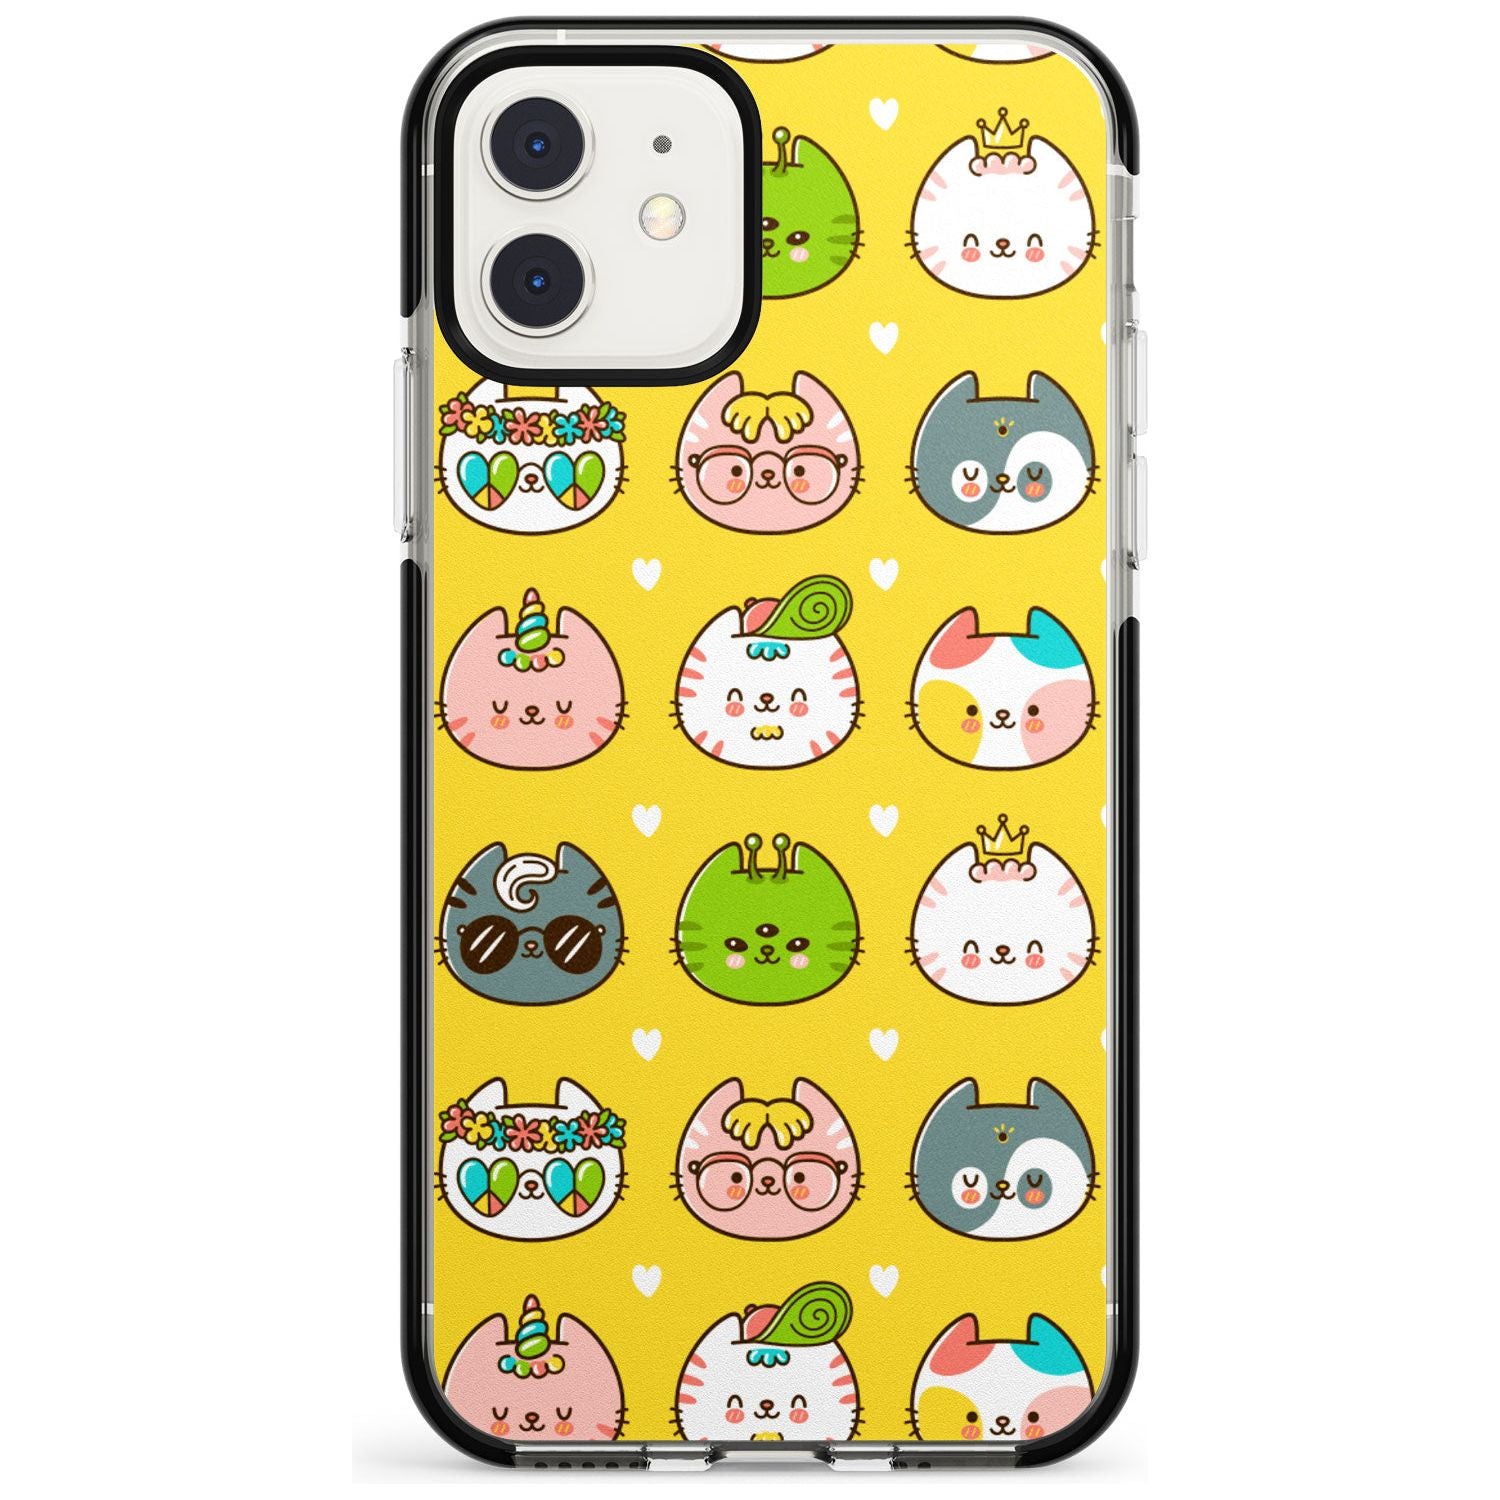 Mythical Cats Kawaii Pattern Black Impact Phone Case for iPhone 11 Pro Max